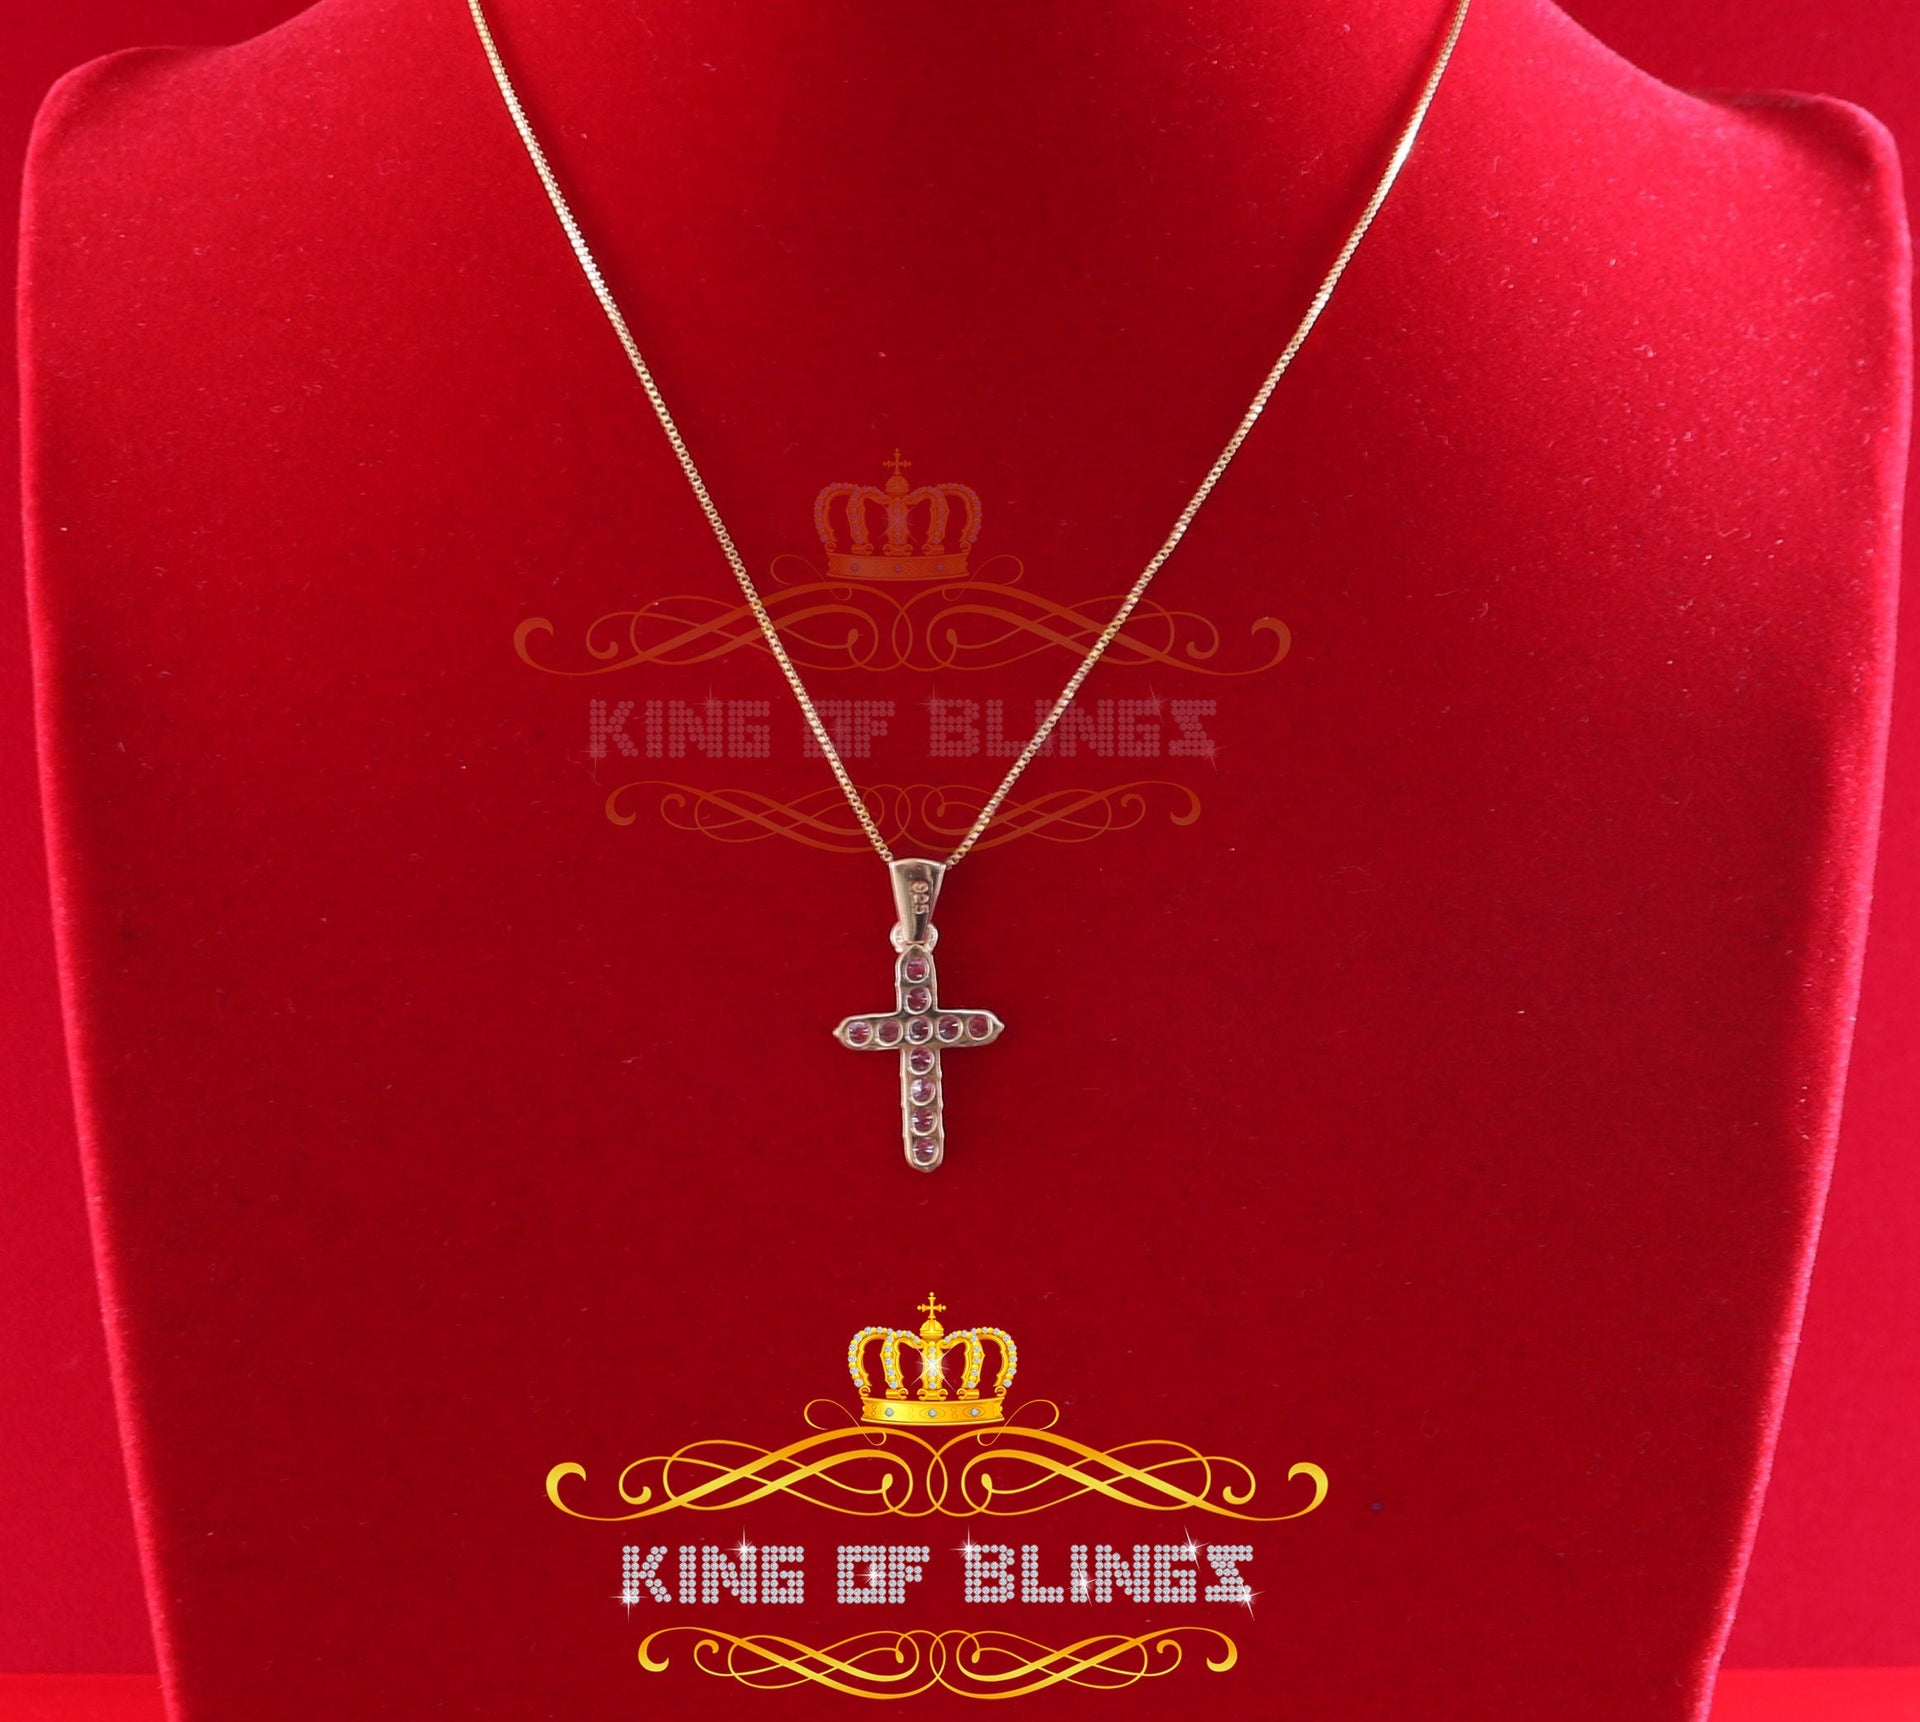 Promising Fancy Yellow Sterling Silver Cross Pendant with 1.21ct Cubic Zirconia KING OF BLINGS